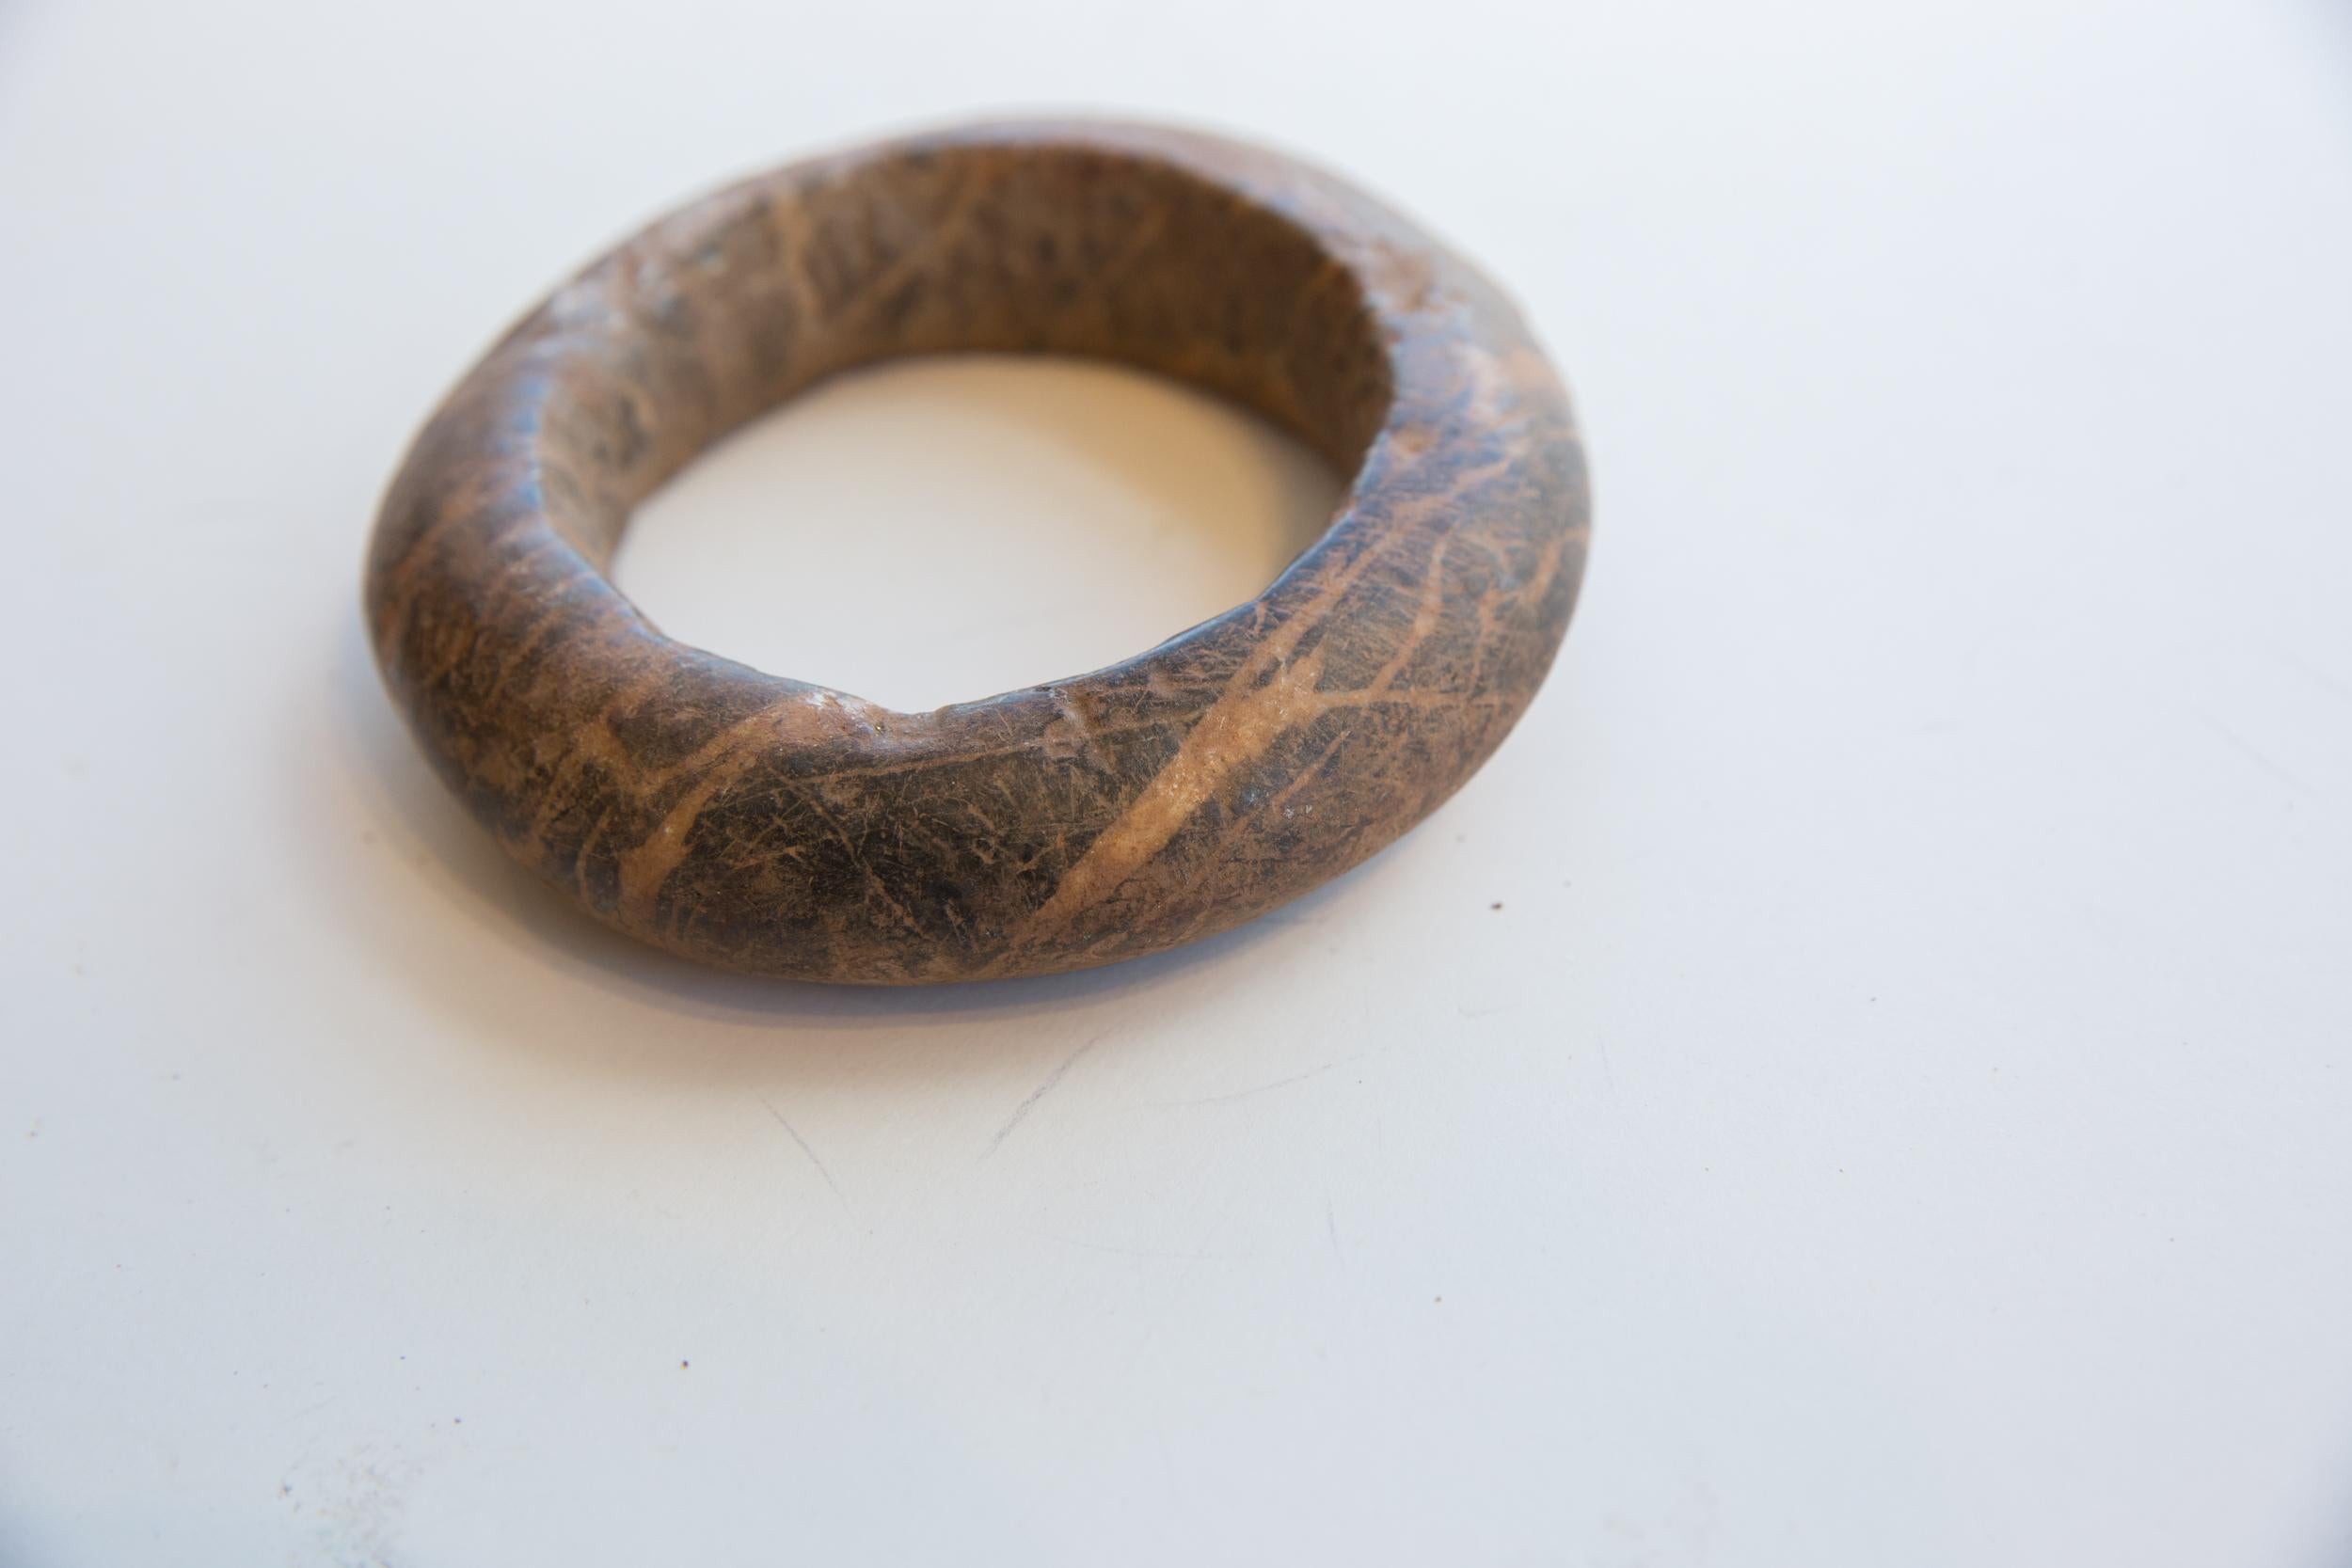 :: Antique handmade African Neolithic era marble bracelet. These marble bracelets were hand carved in North Africa and likely used for currency. This piece is a unique collectible, with great craftsmanship having gone into its creation! As this item